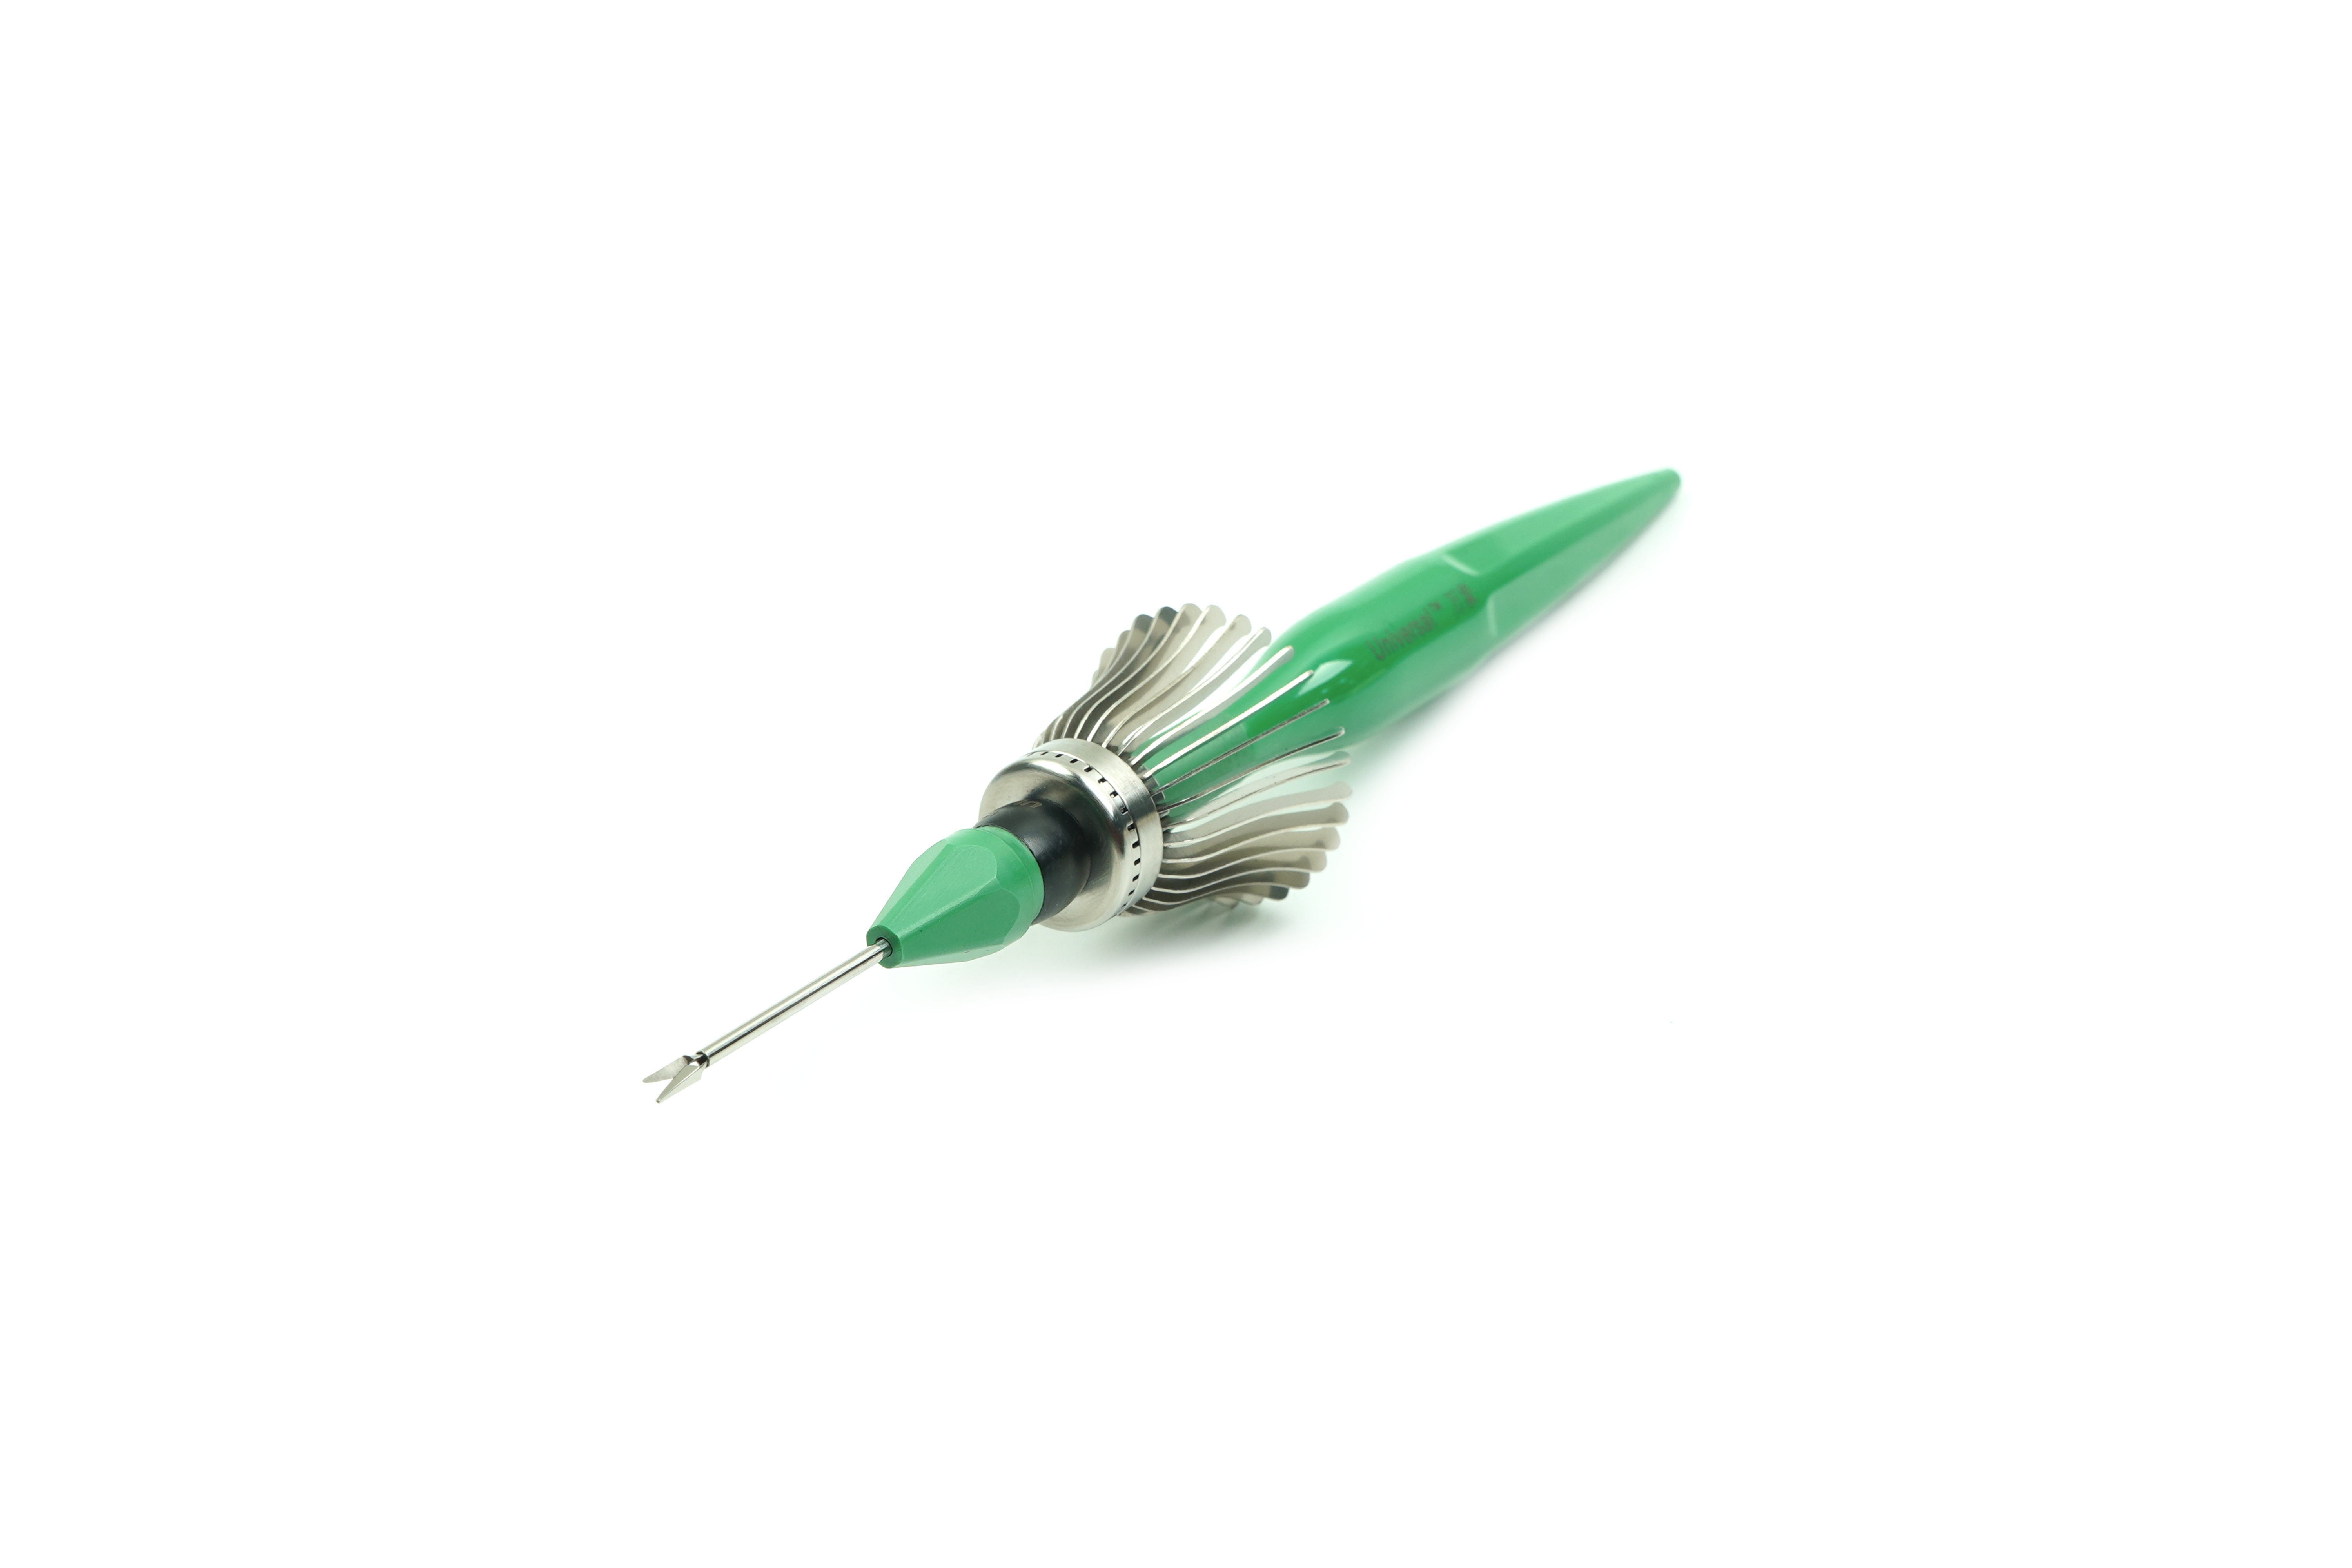 UN-4100(18G) Stainless Steel Curved IOL Cutters